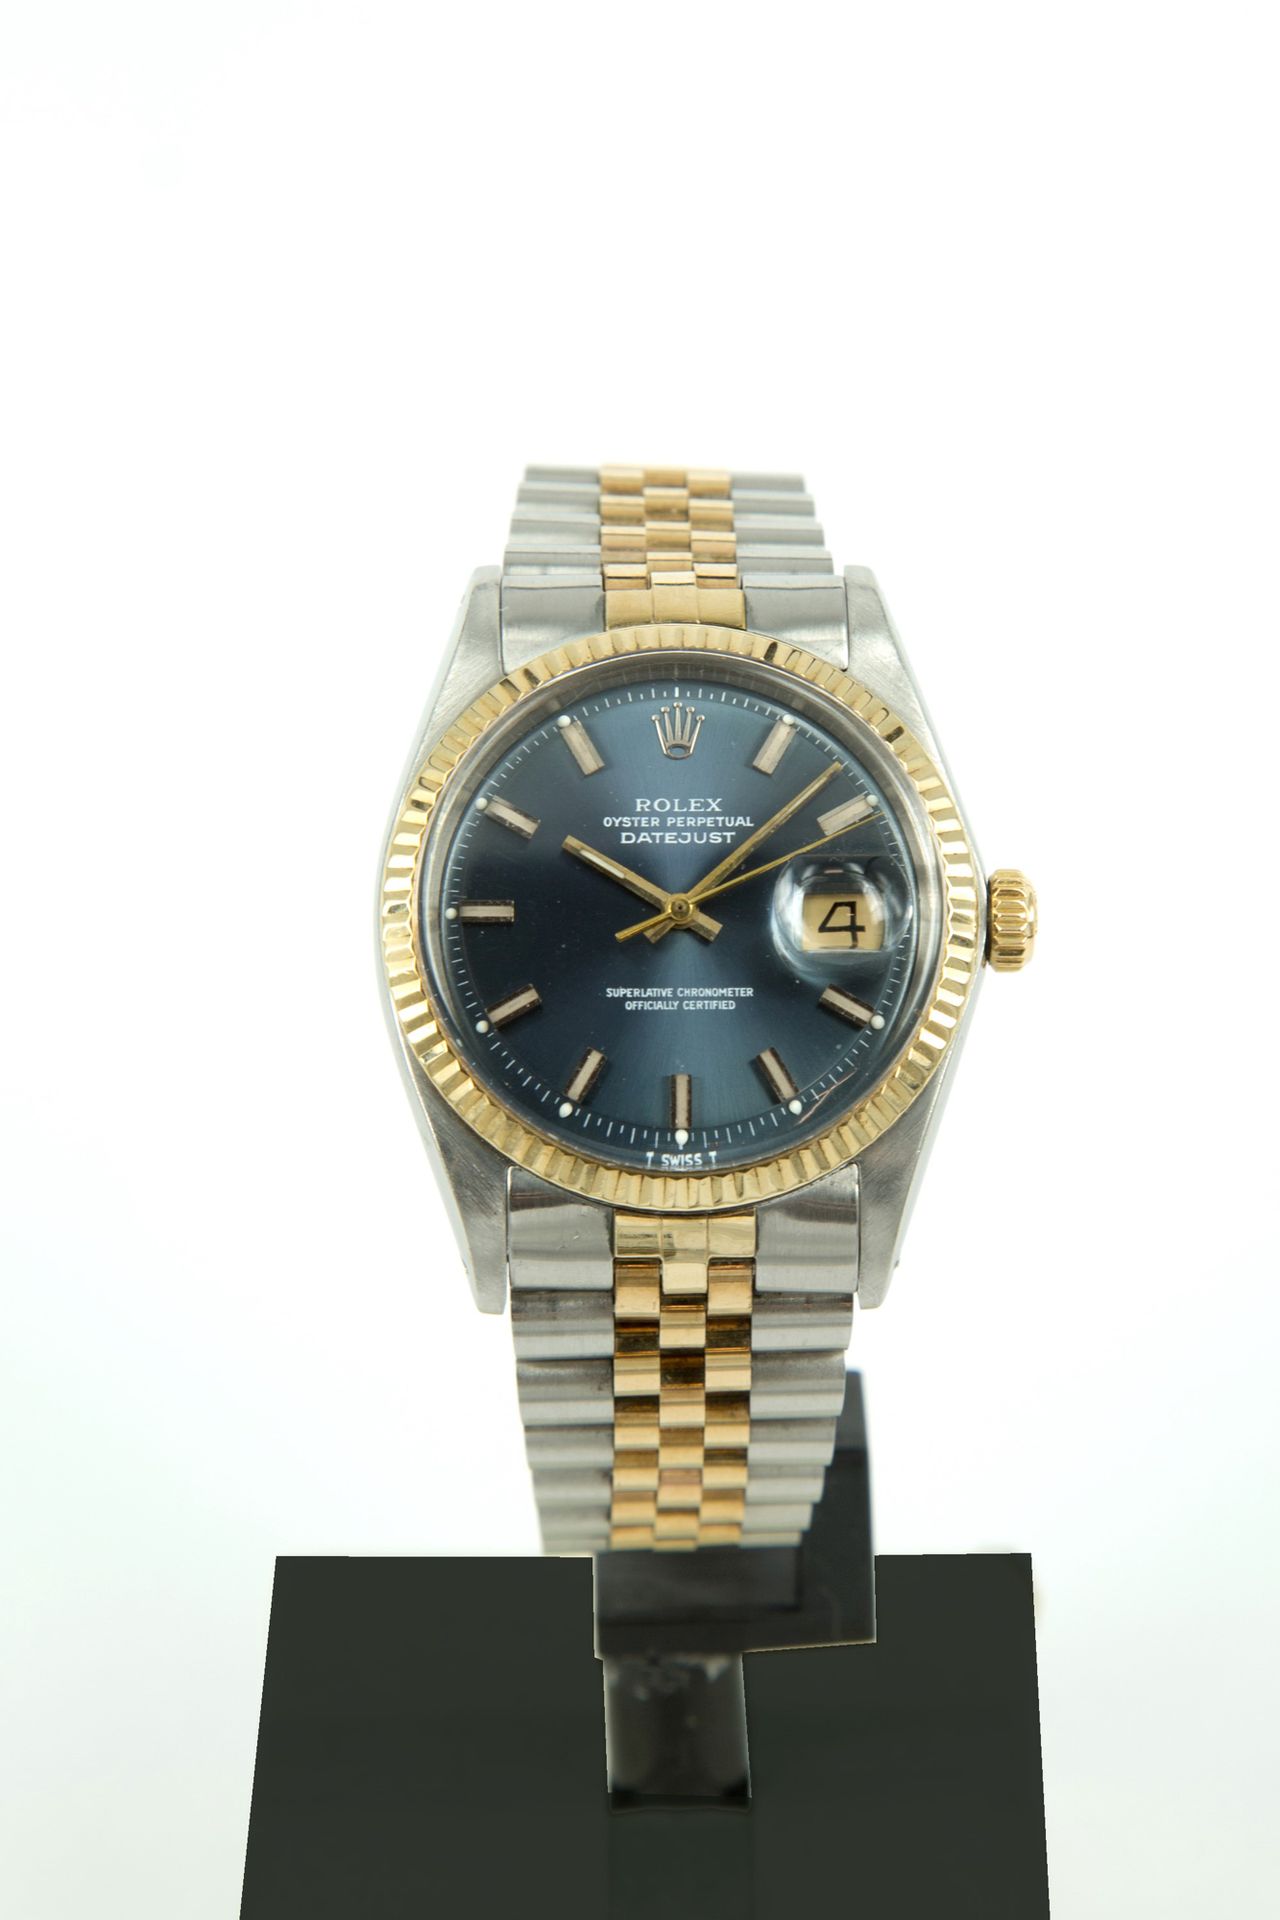 ROLEX Datejust in steel and gold Datejust automatic steel and gold watch with ju&hellip;